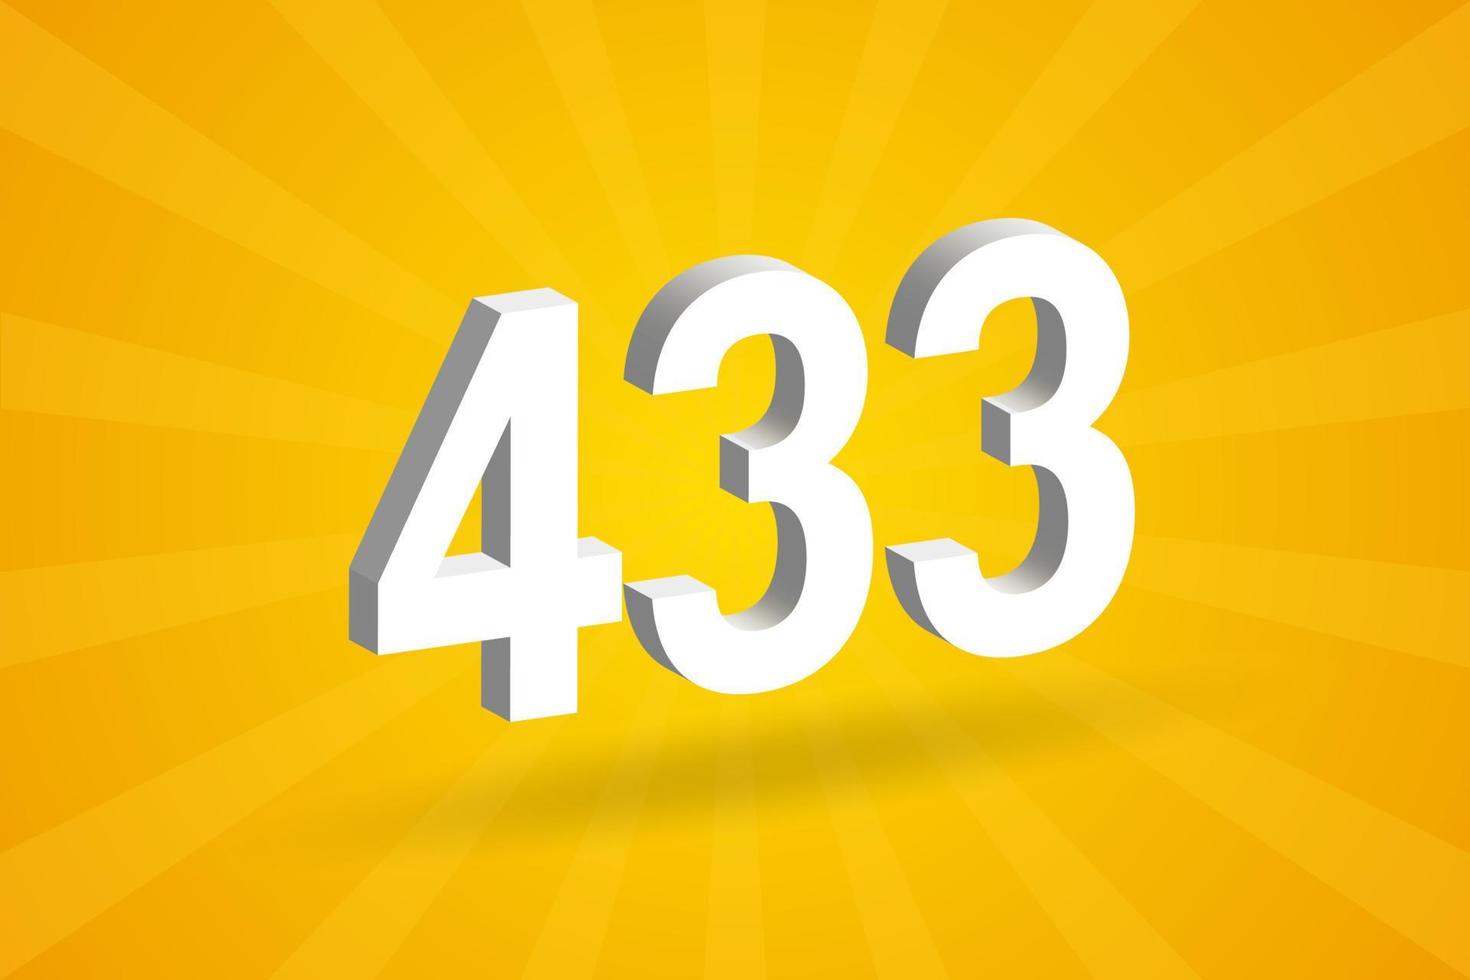 3D 433 number font alphabet. White 3D Number 433 with yellow background vector